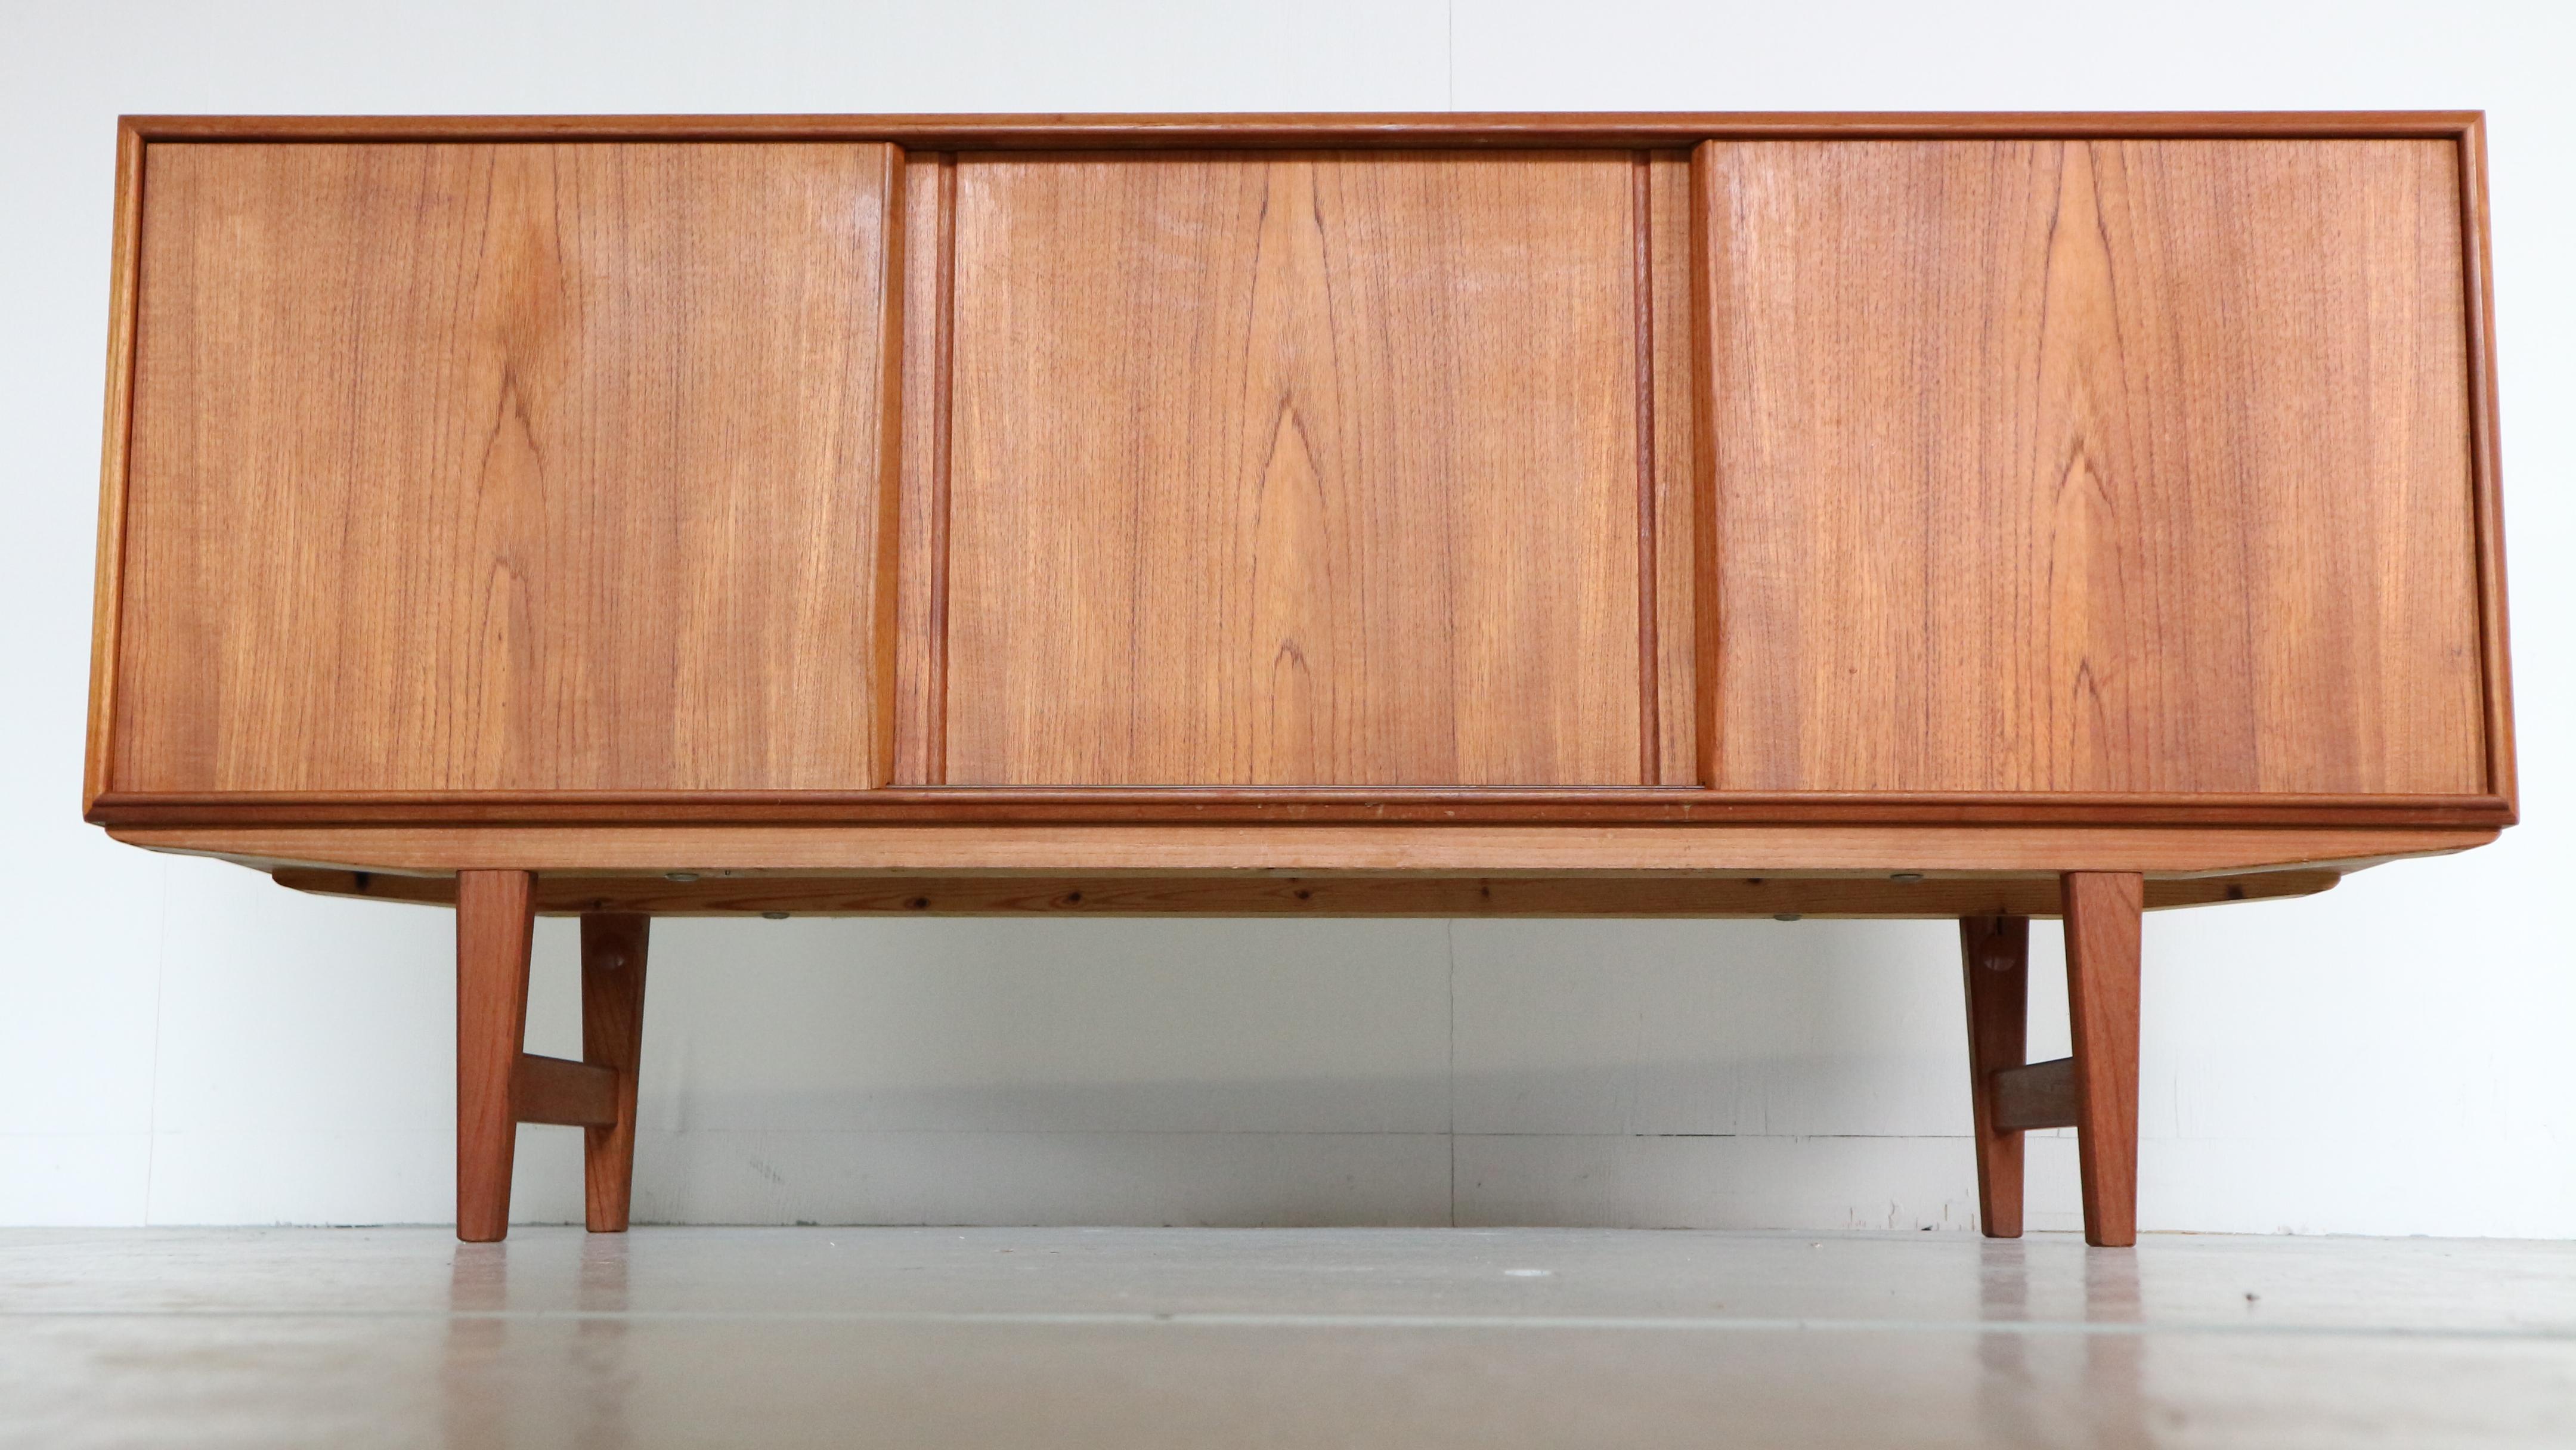 A beautiful Danish teak sideboard designed by EW Bach manufactured by Sejling Skabe (DK)

A stunning design, very sculptural with great lines, the solid teak handles are beautifully styled.
 